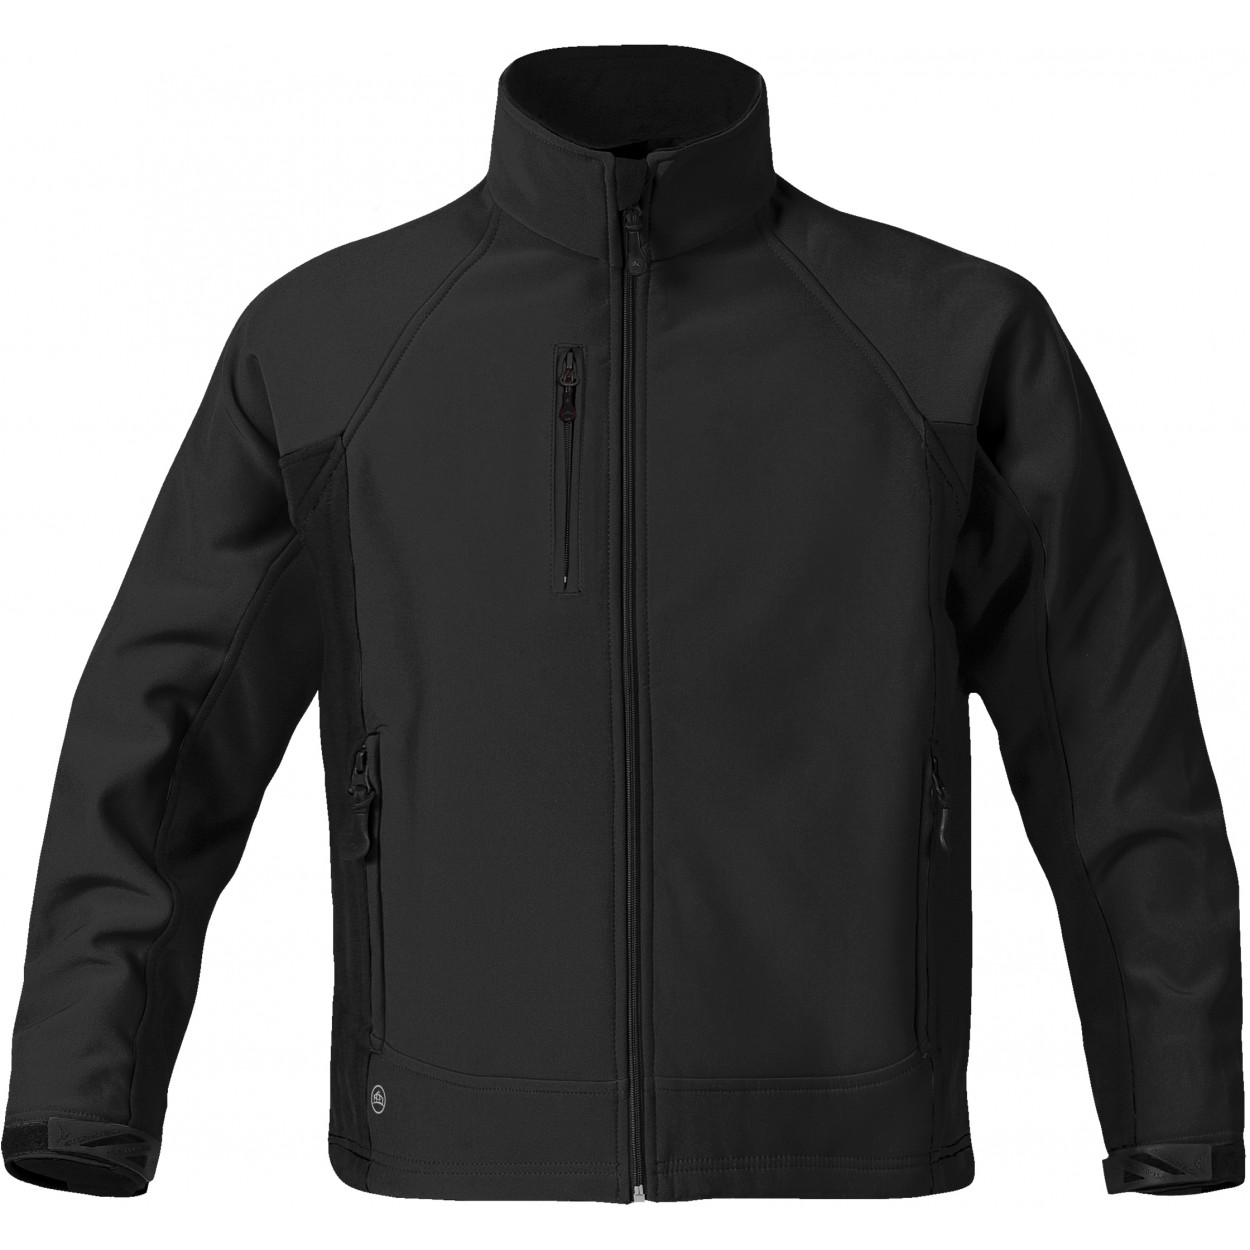 STORMTECH CXJ-1 MENS CREW BONDED THERMAL INSULATED JACKET - $144.00 ...